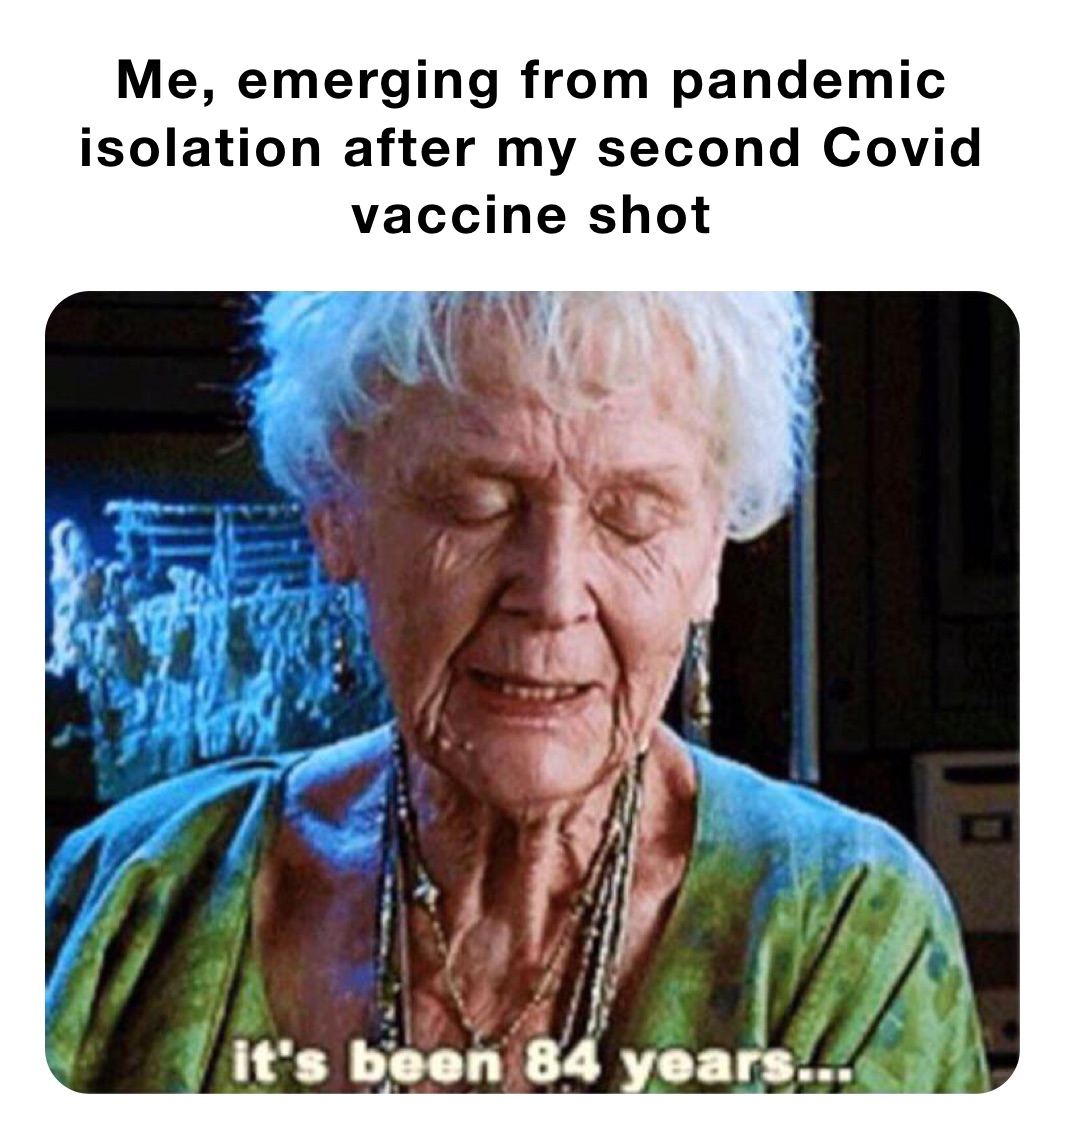 Me, emerging from pandemic isolation after my second Covid vaccine shot